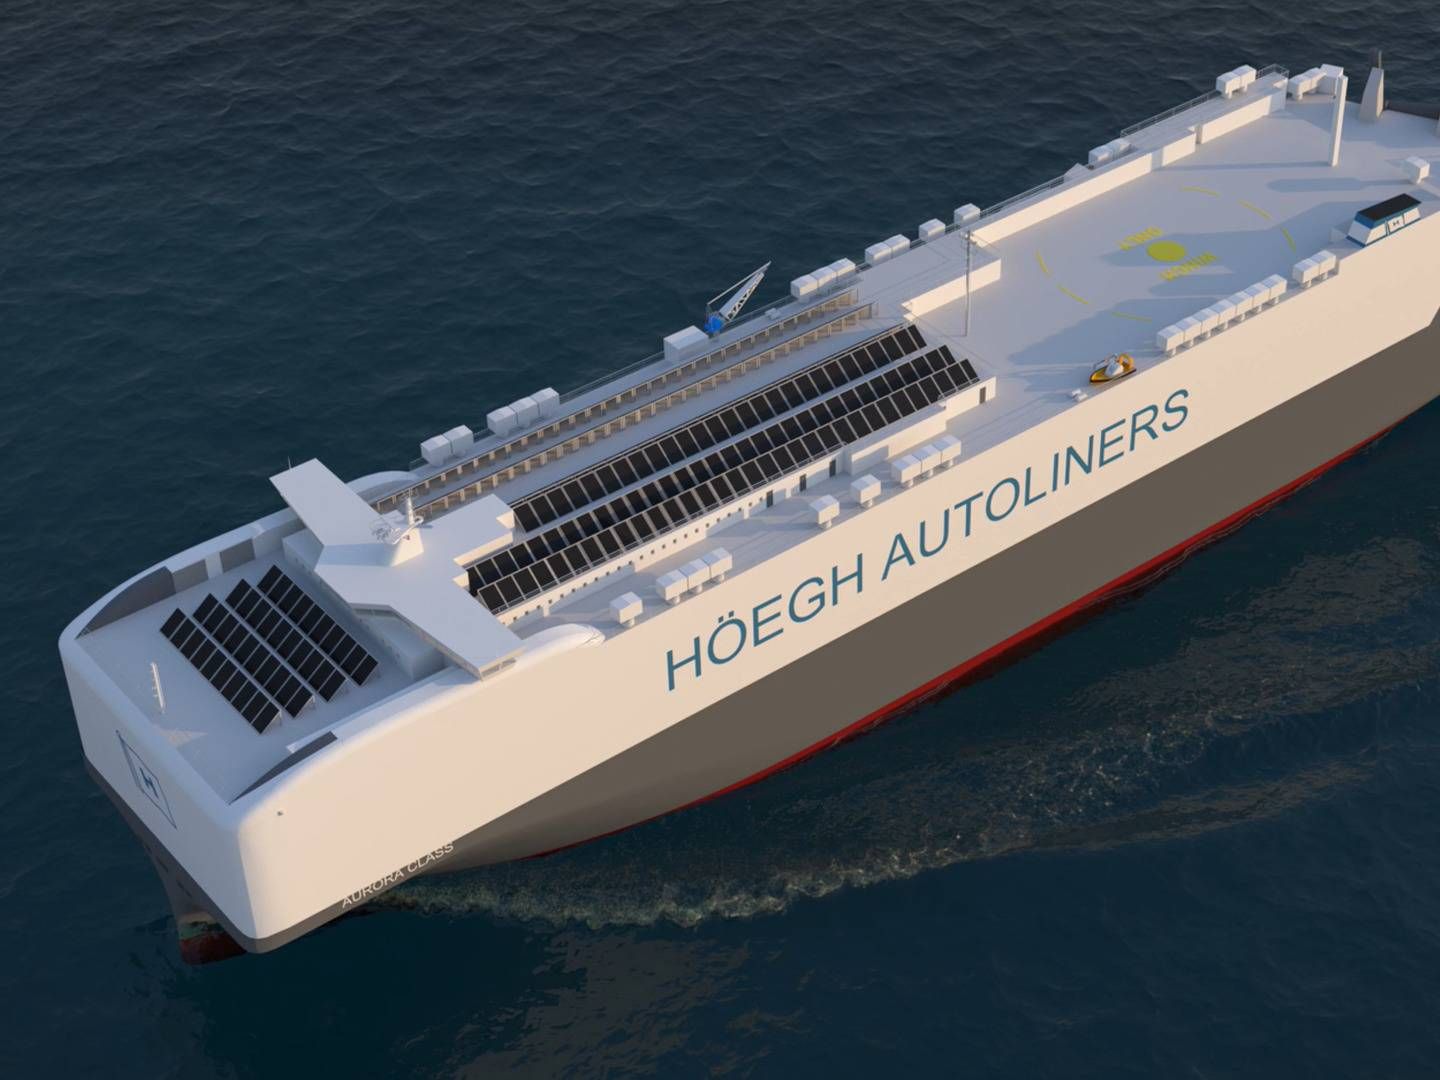 The new Aurora Class car carrier that Högh Autoliners plans to build up to 12 of, which has prompted the company to consider an IPO | Photo: Höegh Autoliners